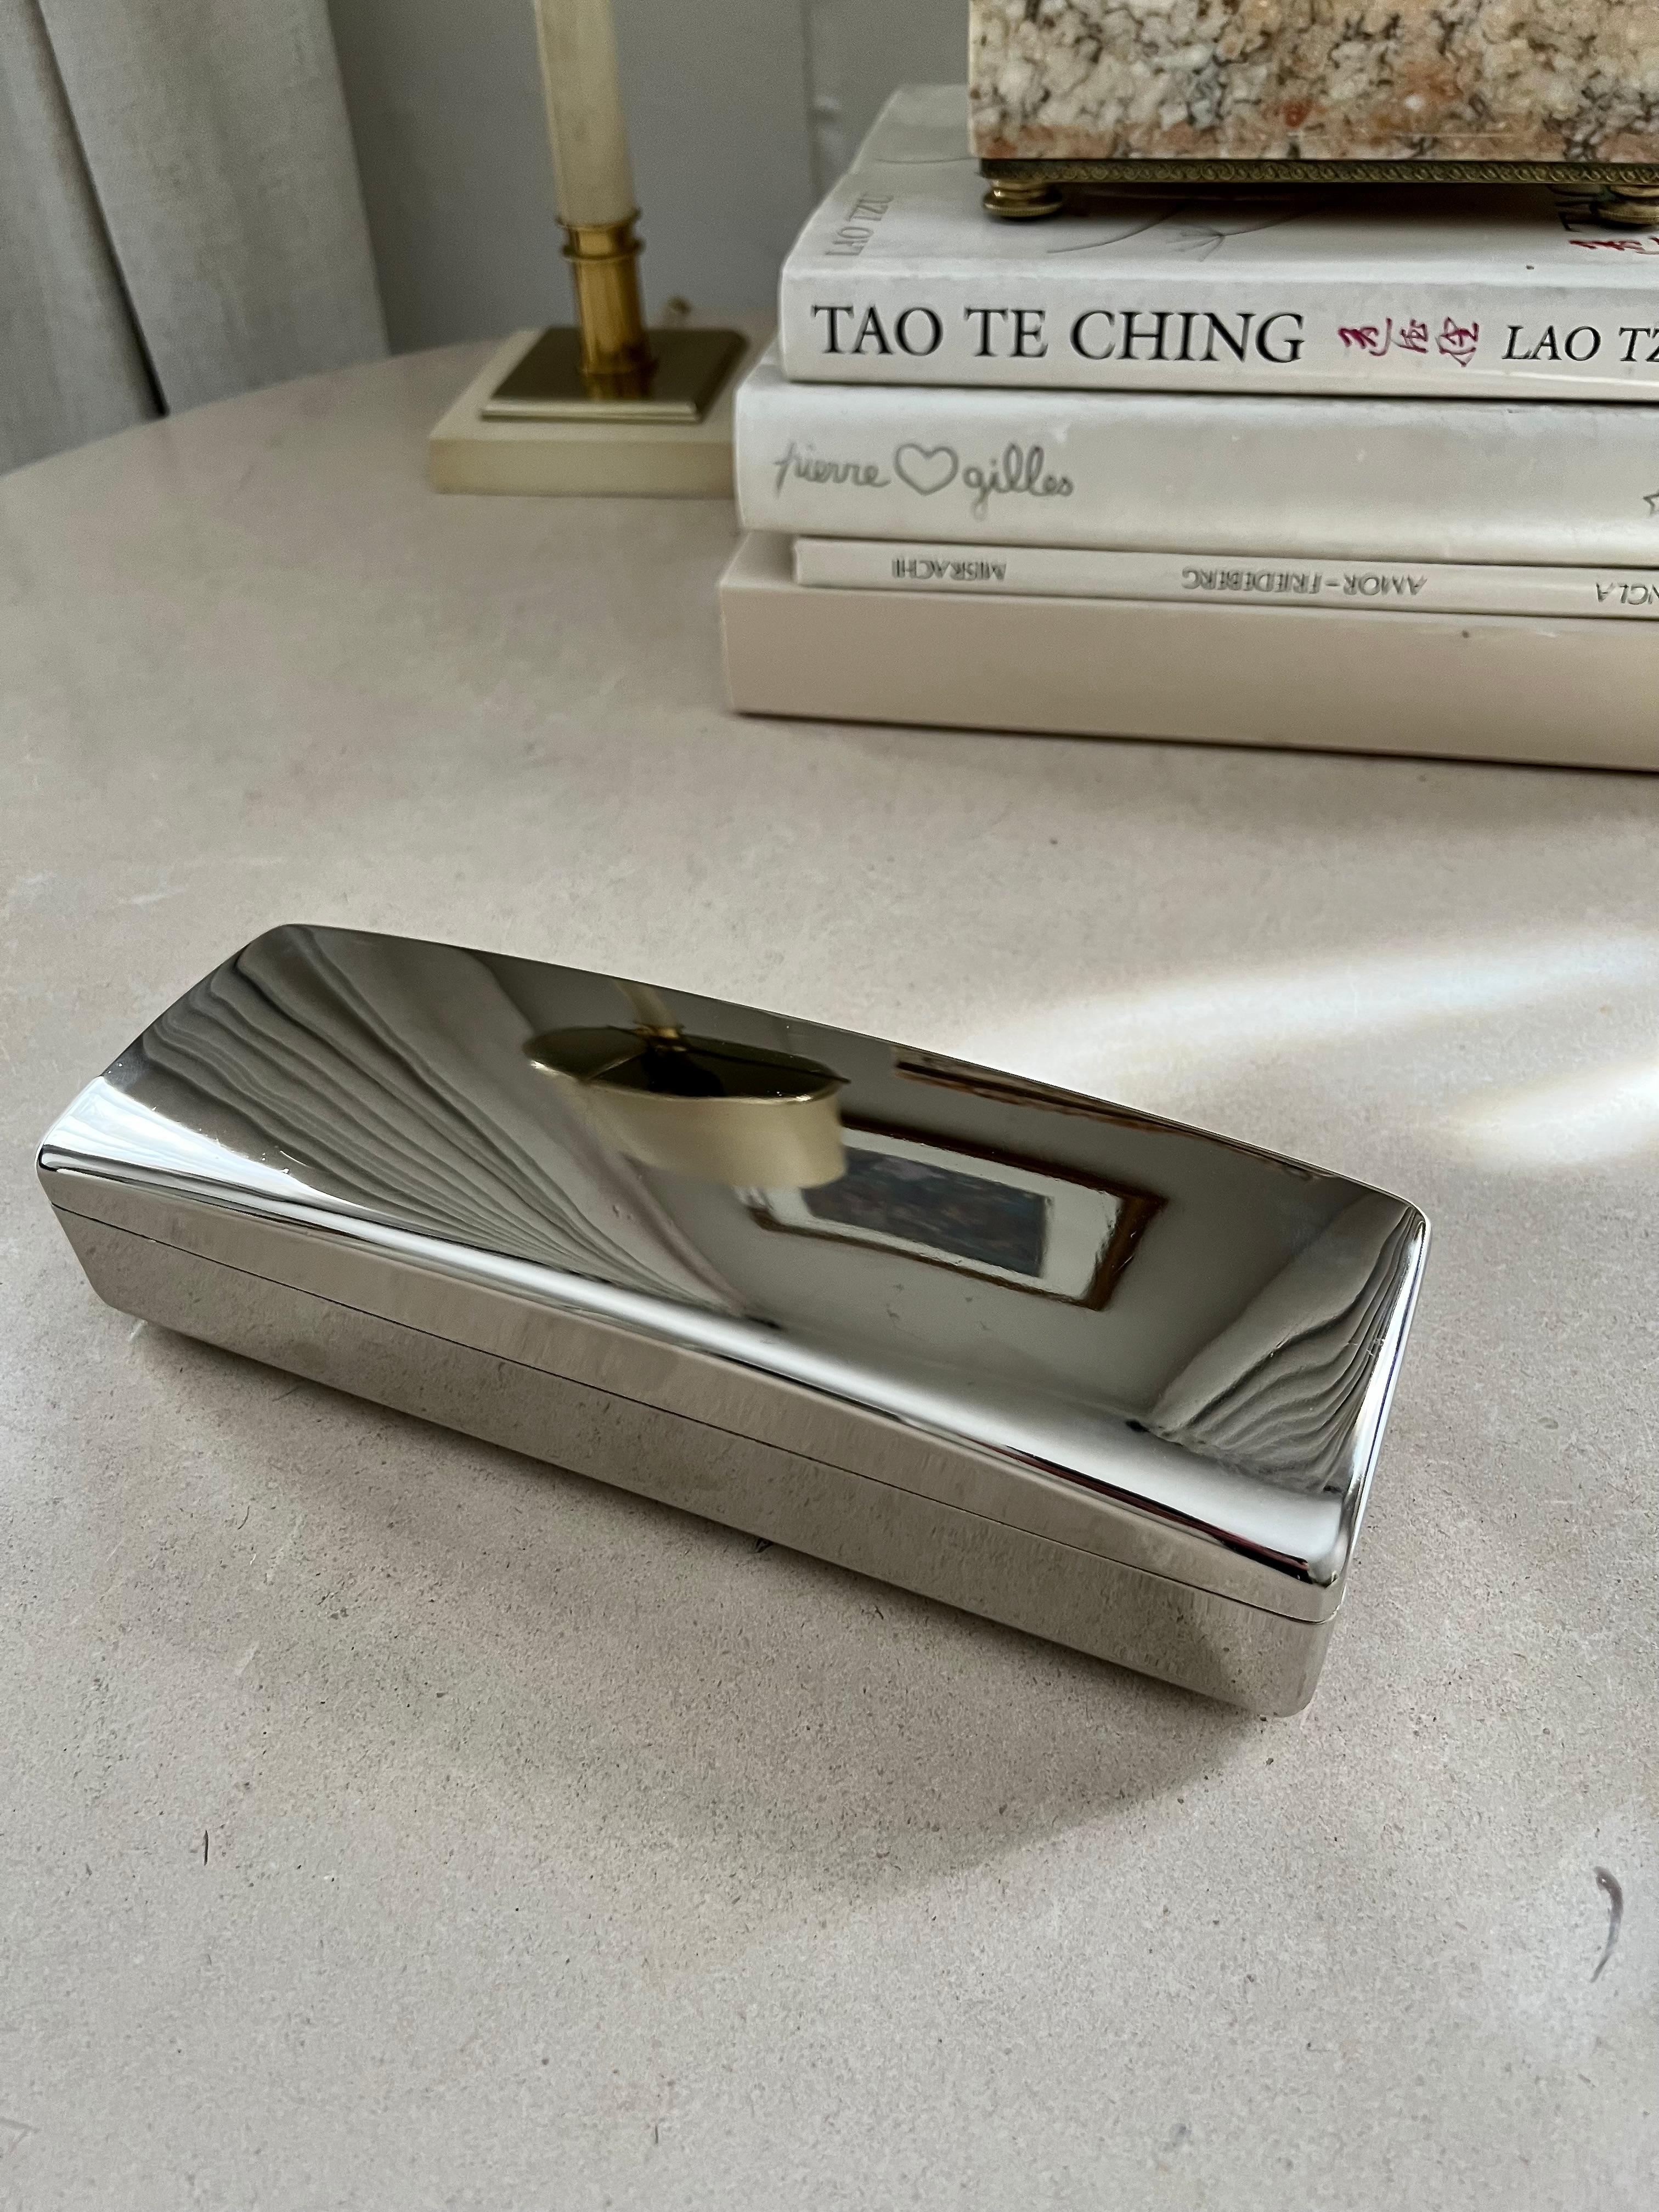 Silver box with three unlined compartments and hinged lid. Felt pads on the bottom to protect surfaces. Recently polished. Opens and closes smoothly. A complement to any vanity or dresser. A wonderful place for jewelry, hair accessories, mementos or